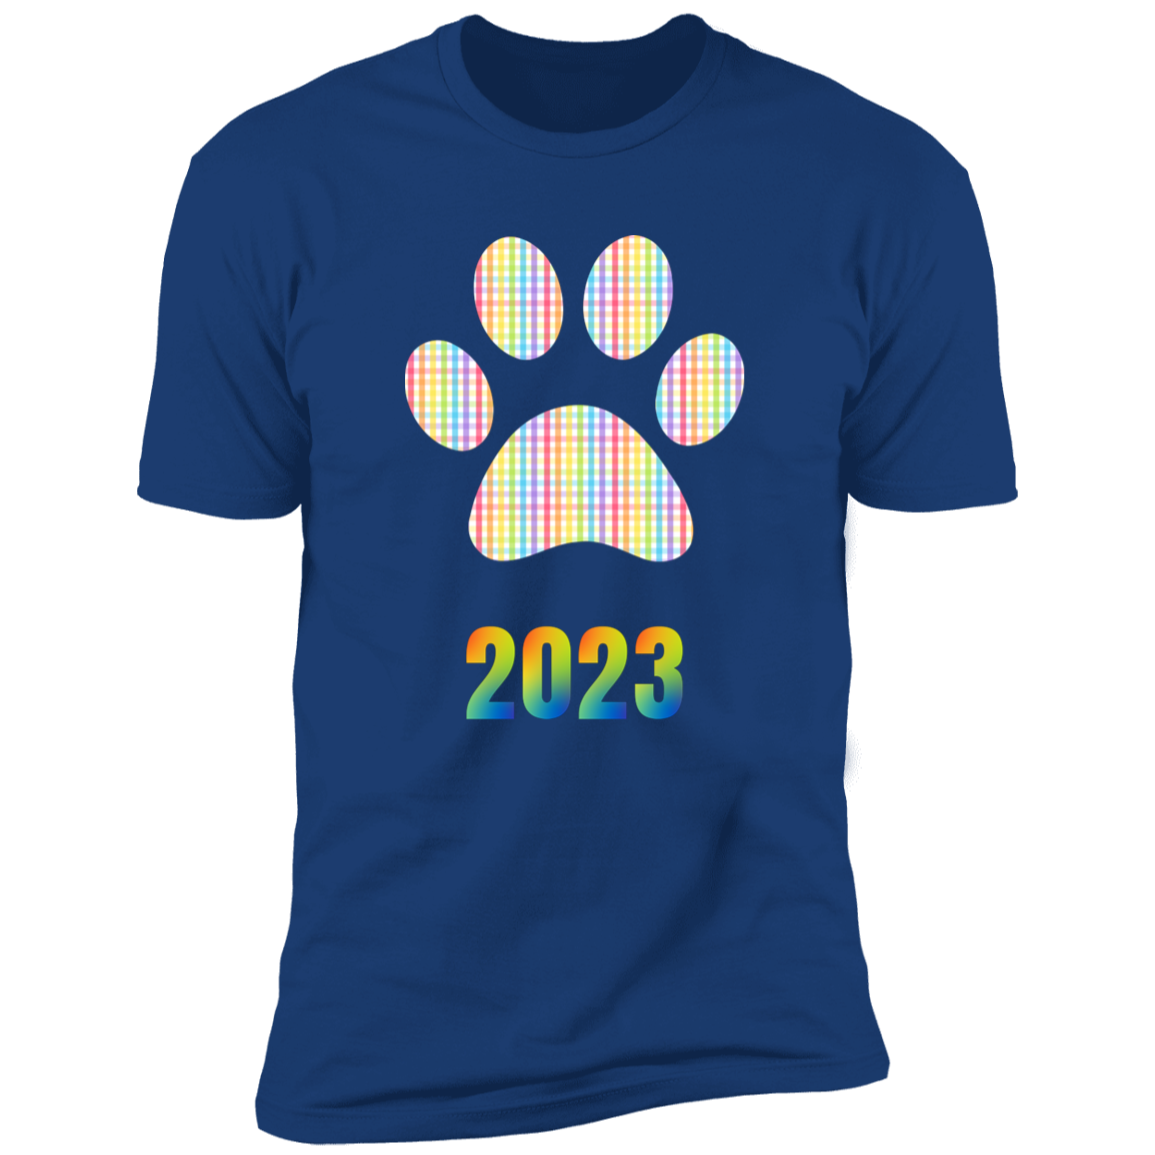 Pride Paw 2023 (Gingham) Pride T-shirt, Paw Pride Dog Shirt for humans, in royal blue